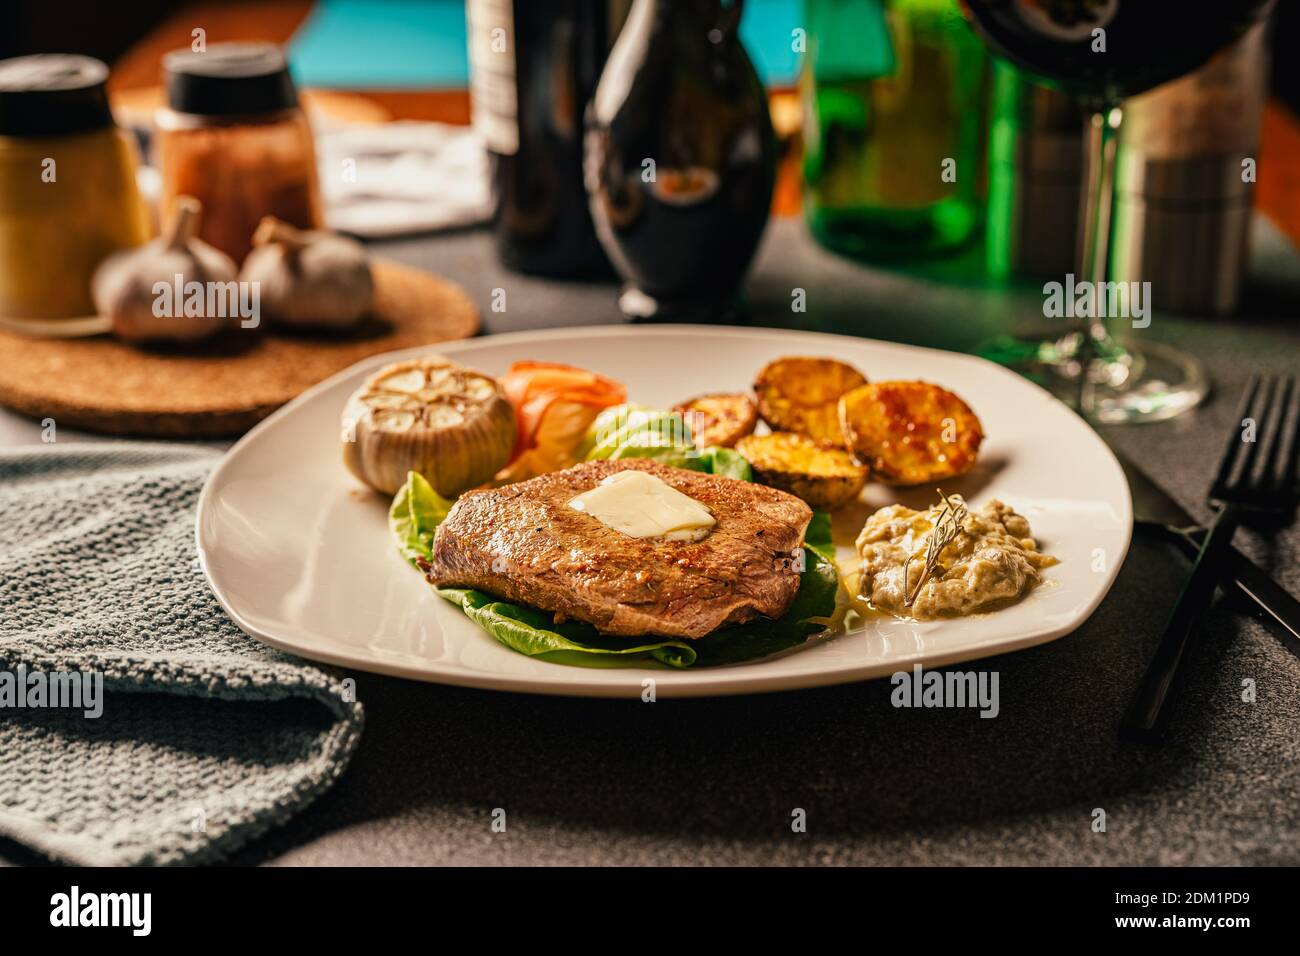 Served plate of seared tenderloin steak with side of baked baby potatoes and garlic dip.Filet mignon dinner for special occasion and home celebration. Stock Photo